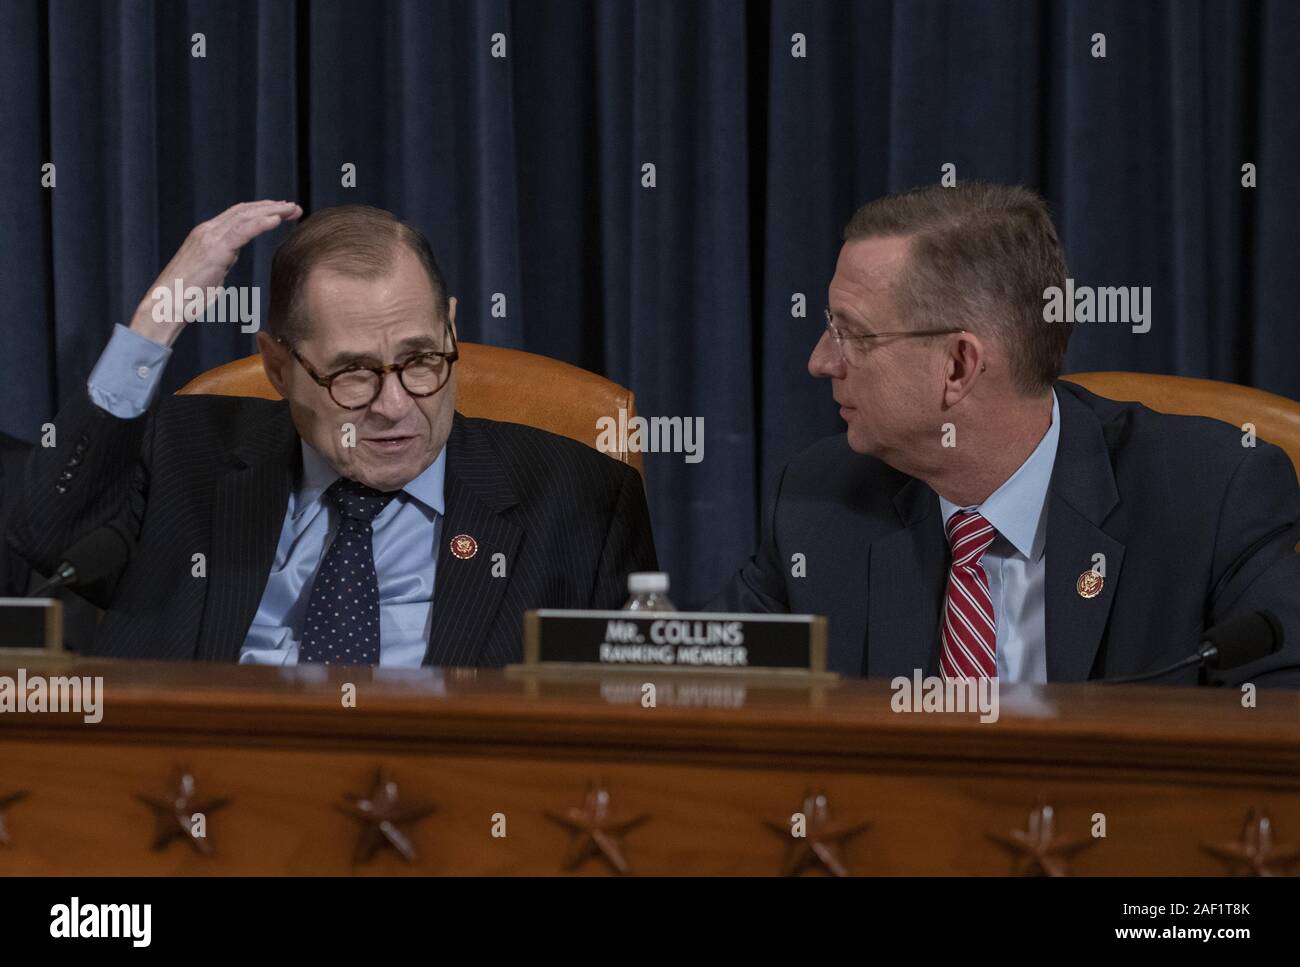 December 11, 2019, Washington, District of Columbia, USA: United States Representative Jerrold Nadler (Democrat of New York), Chairman, US House Judiciary Committee, left, and US Representative Doug Collins (Republican of Georgia), Ranking Member, US House Judiciary Committee, right, confer prior to hearing opening statements as the US House Committee on the Judiciary begins its markup of House Resolution 755, Articles of Impeachment Against President Donald J. Trump, in the Longworth House Office Building in Washington, DC on Wednesday, December 11, 2019 (Credit Image: © Ron Sachs/CNP via ZU Stock Photo